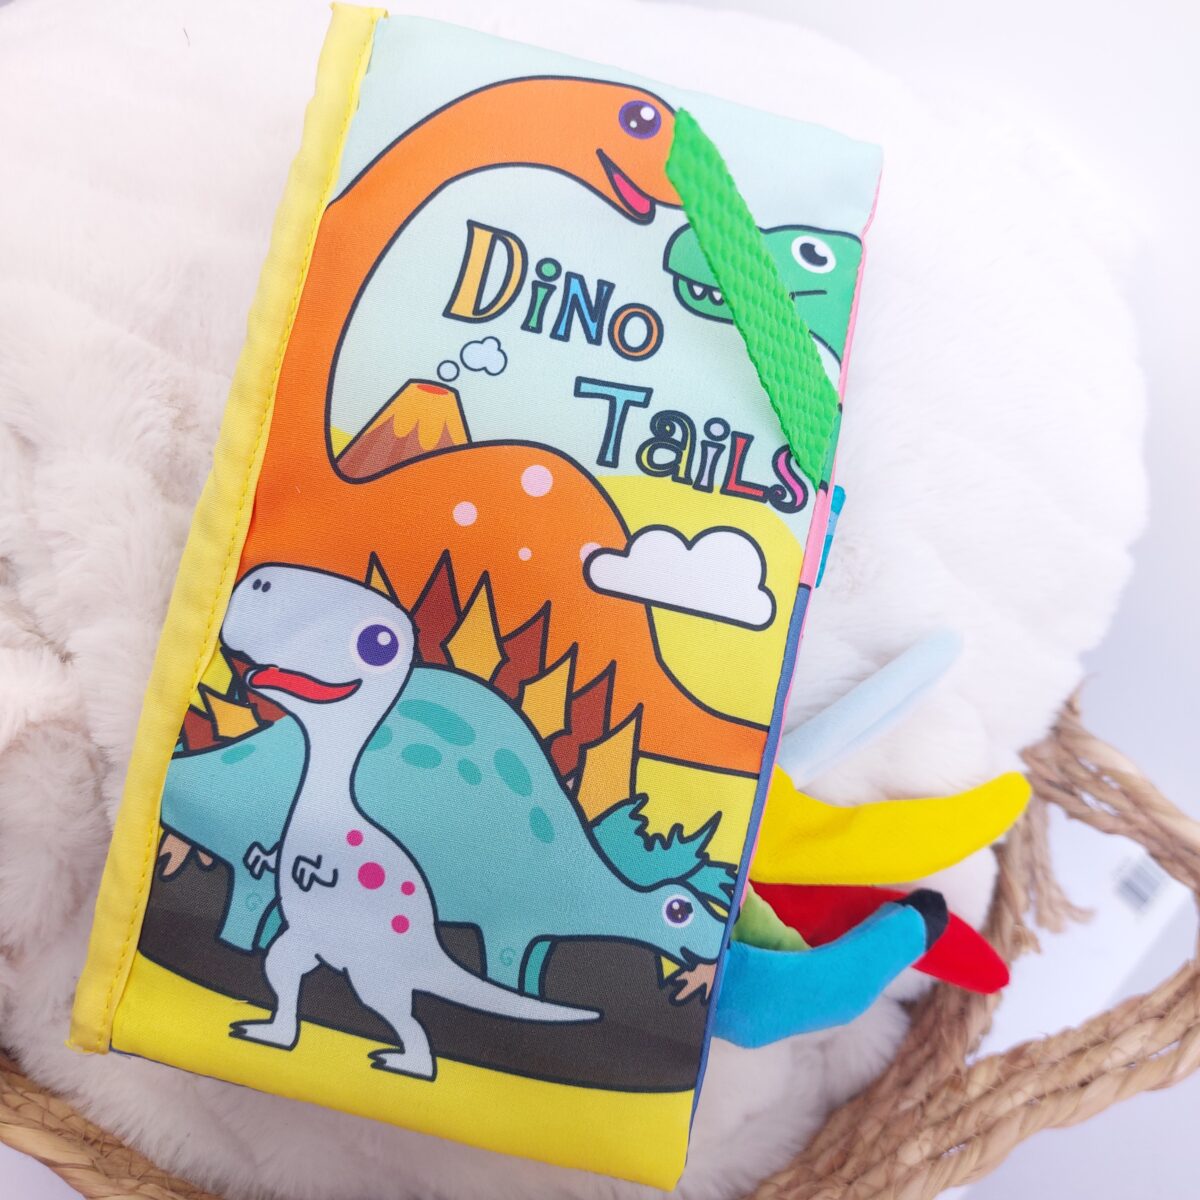 babies soft book, baby soft book, tails cloth book, cloth book, activity book, cloth books for babies, dinosaurs books for babies